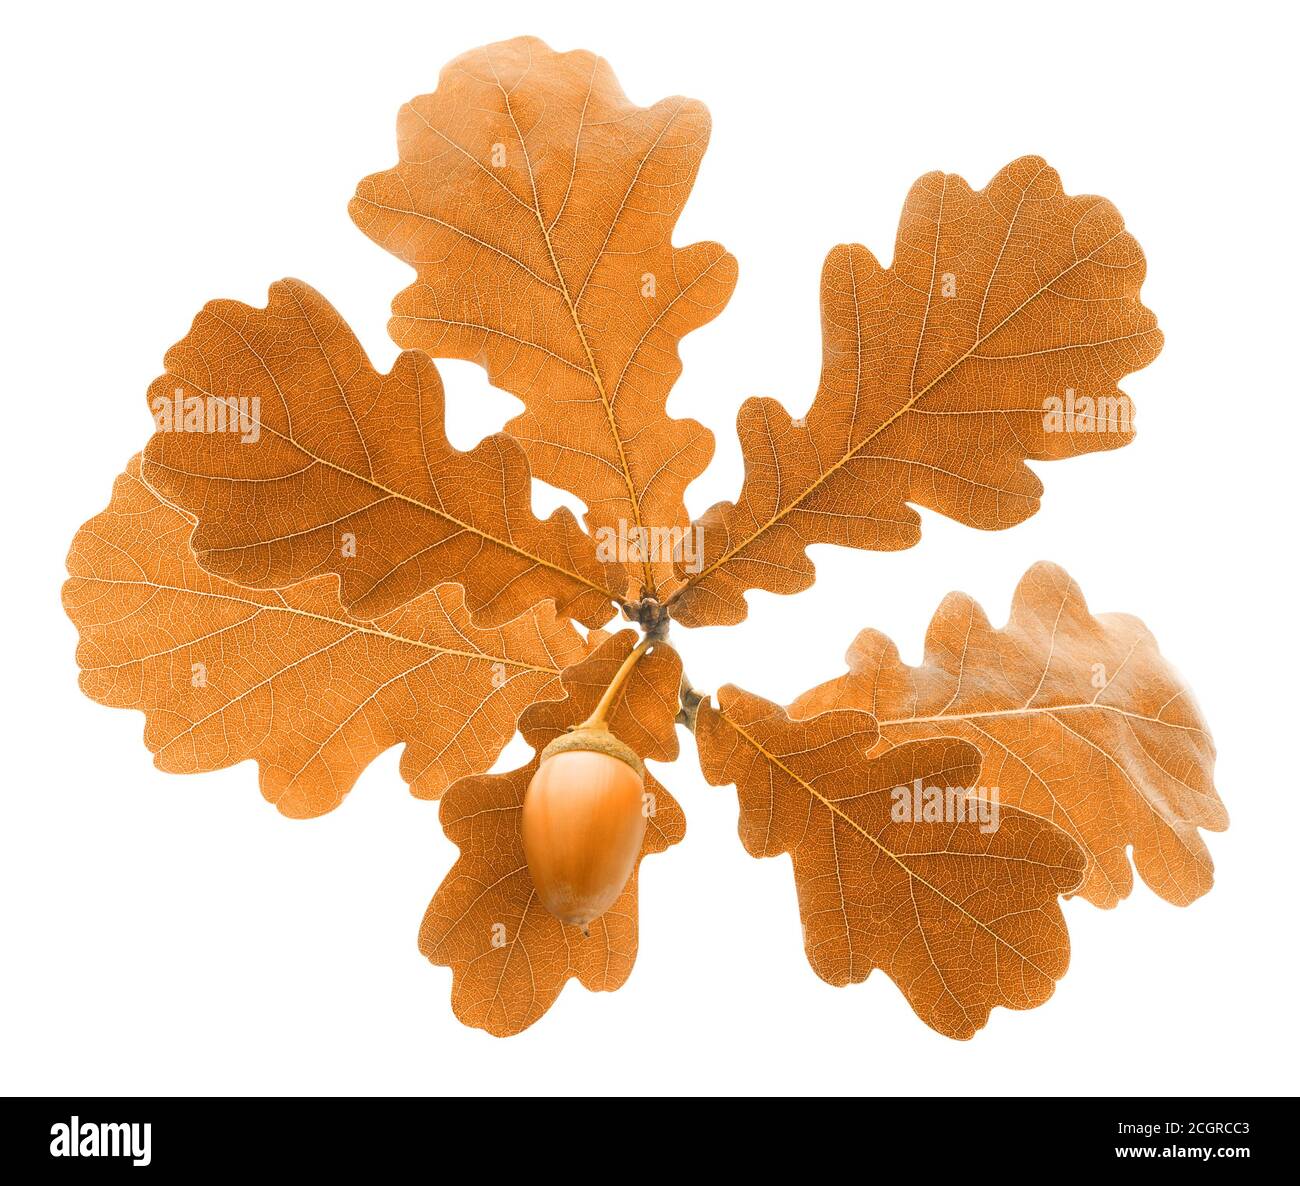 Autumn oak tree branch with light brown leaves and acorn isolated on white background Stock Photo